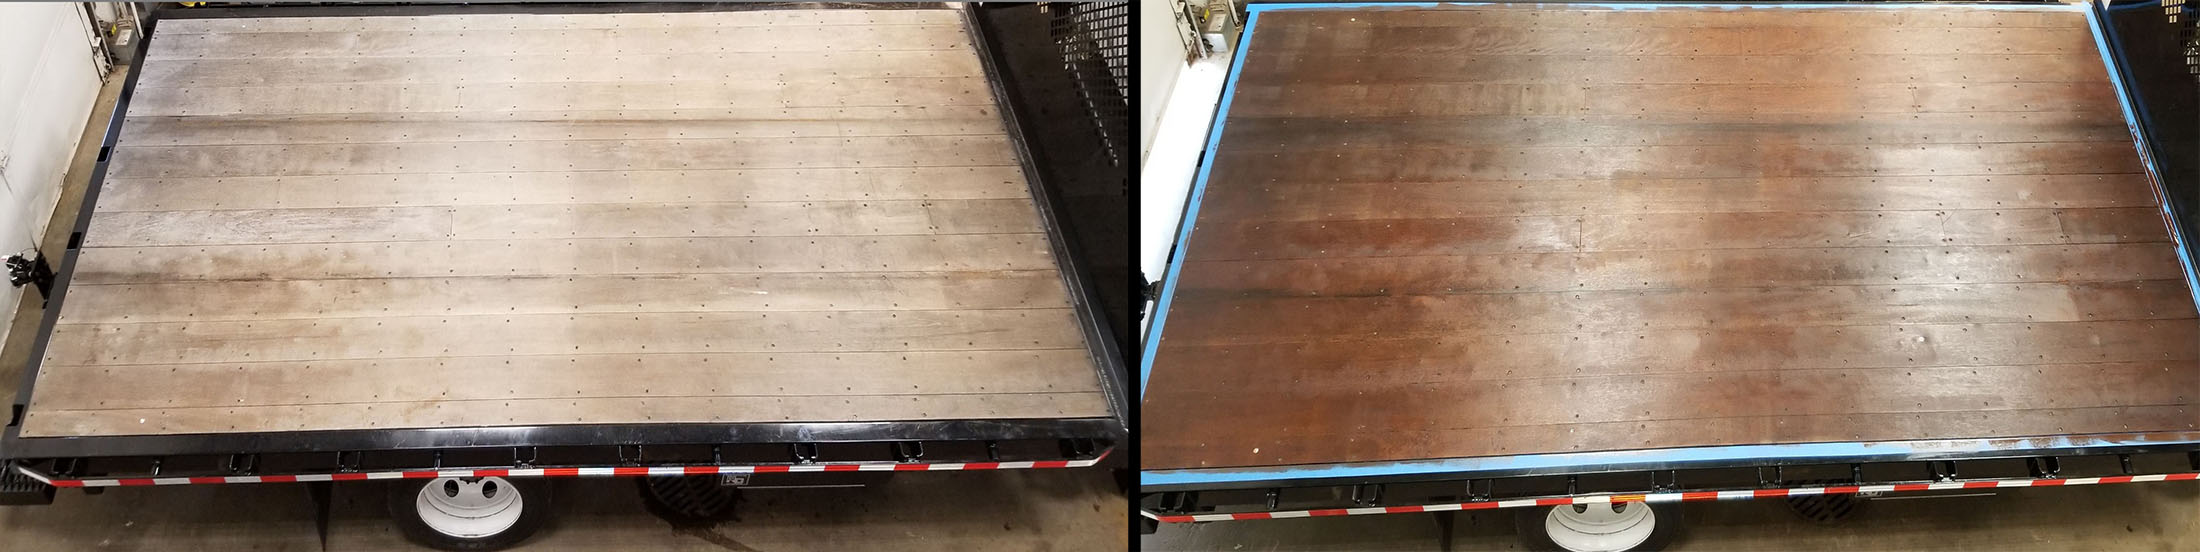 Mark from Wisconsin, Before and after of a Sealed Apitong Deck Replacement